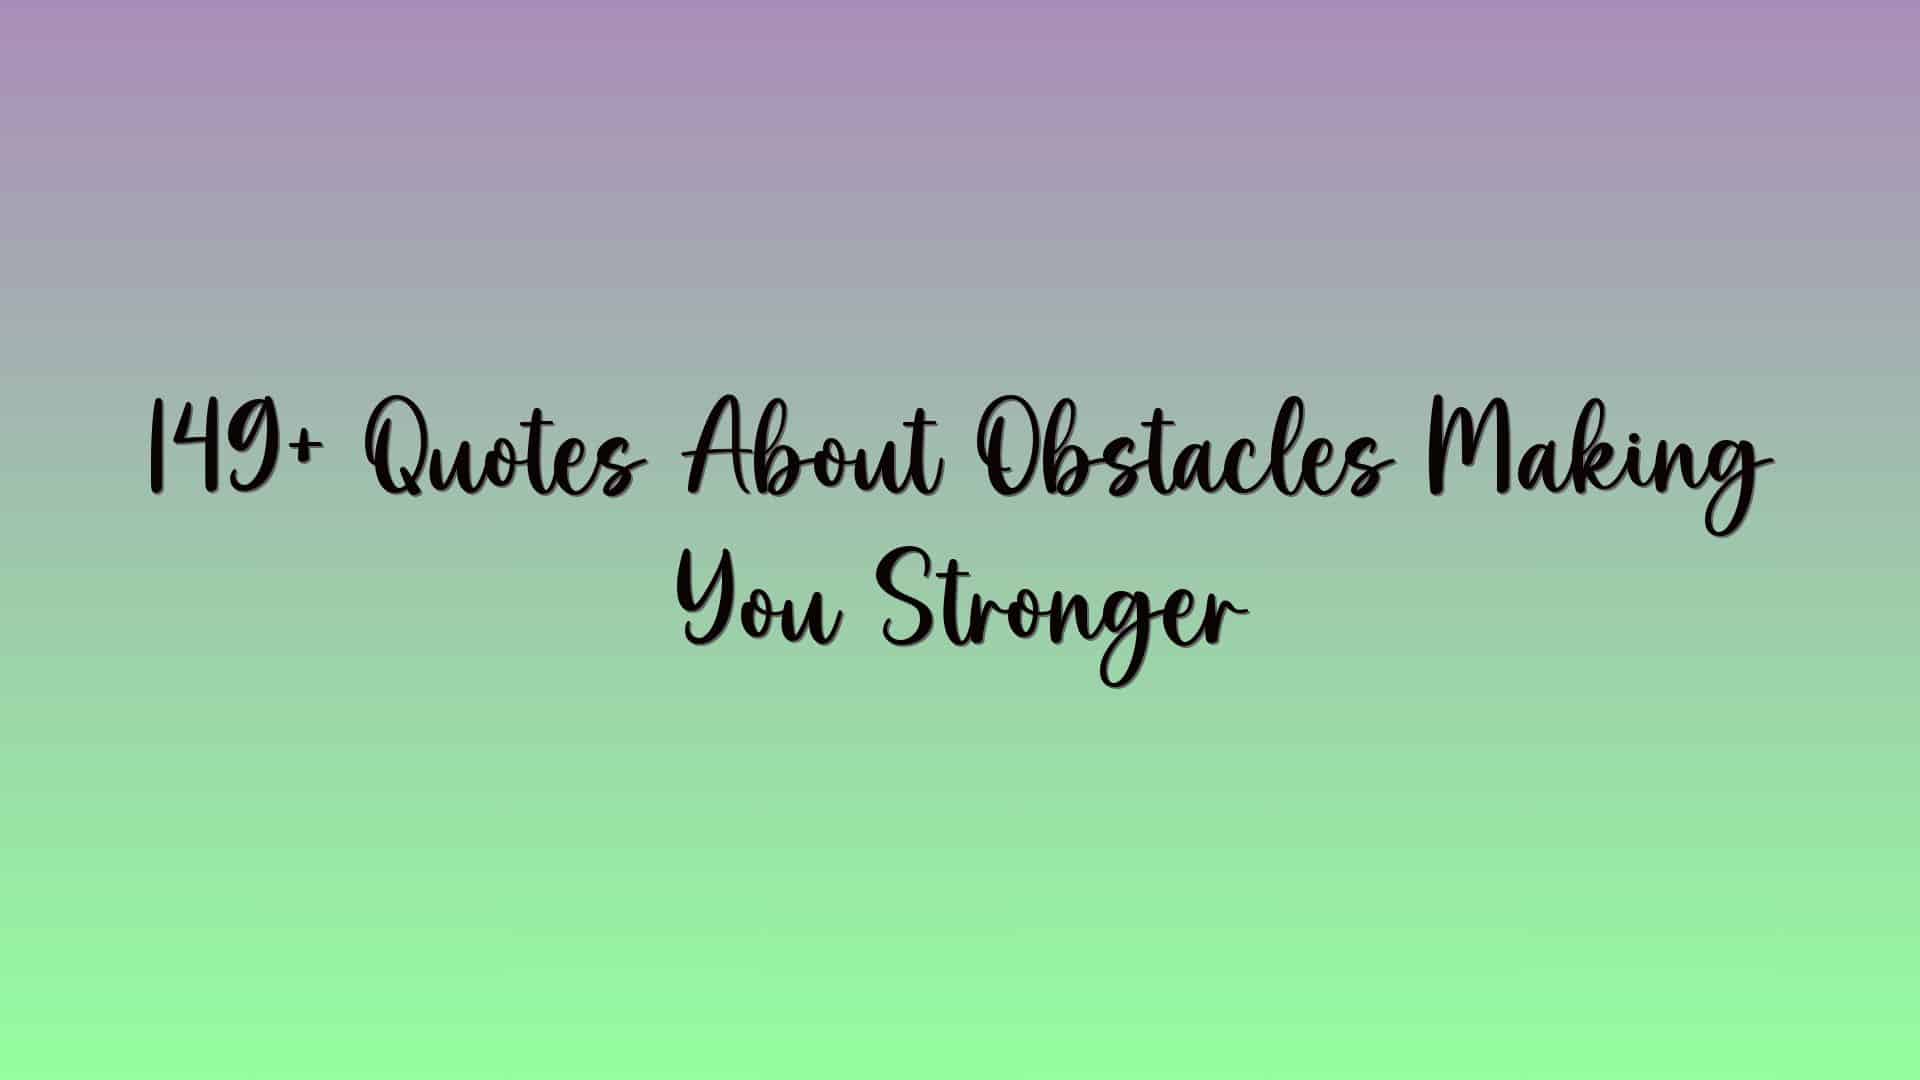 149+ Quotes About Obstacles Making You Stronger